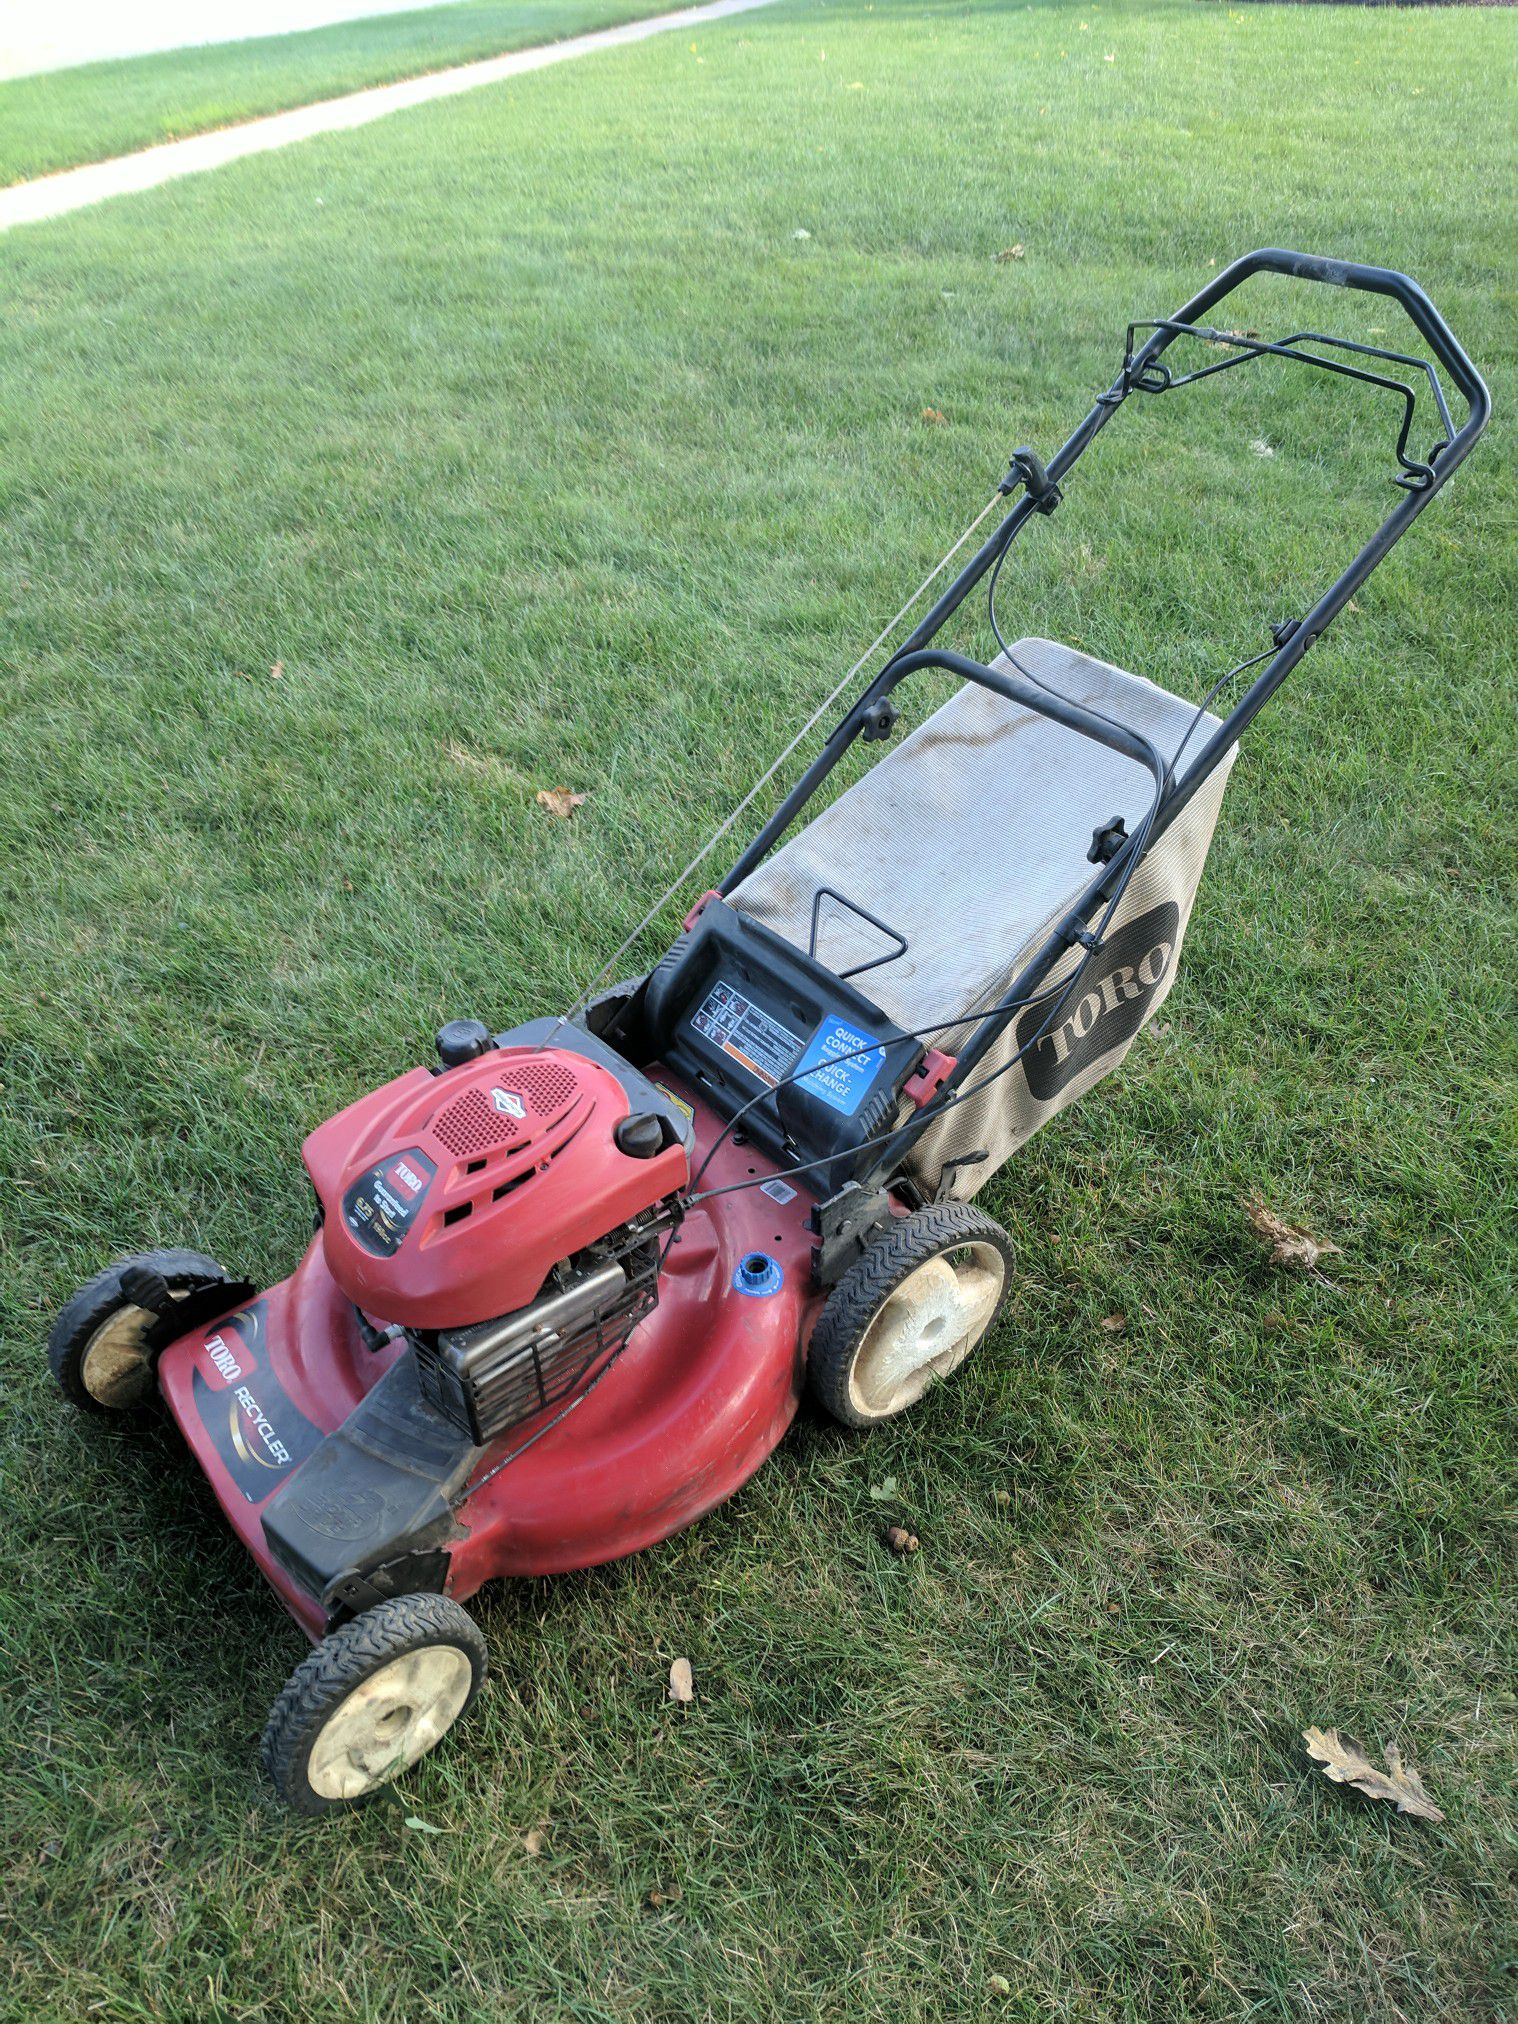 Toro self propelled lawn mower with bag $95 FIRM